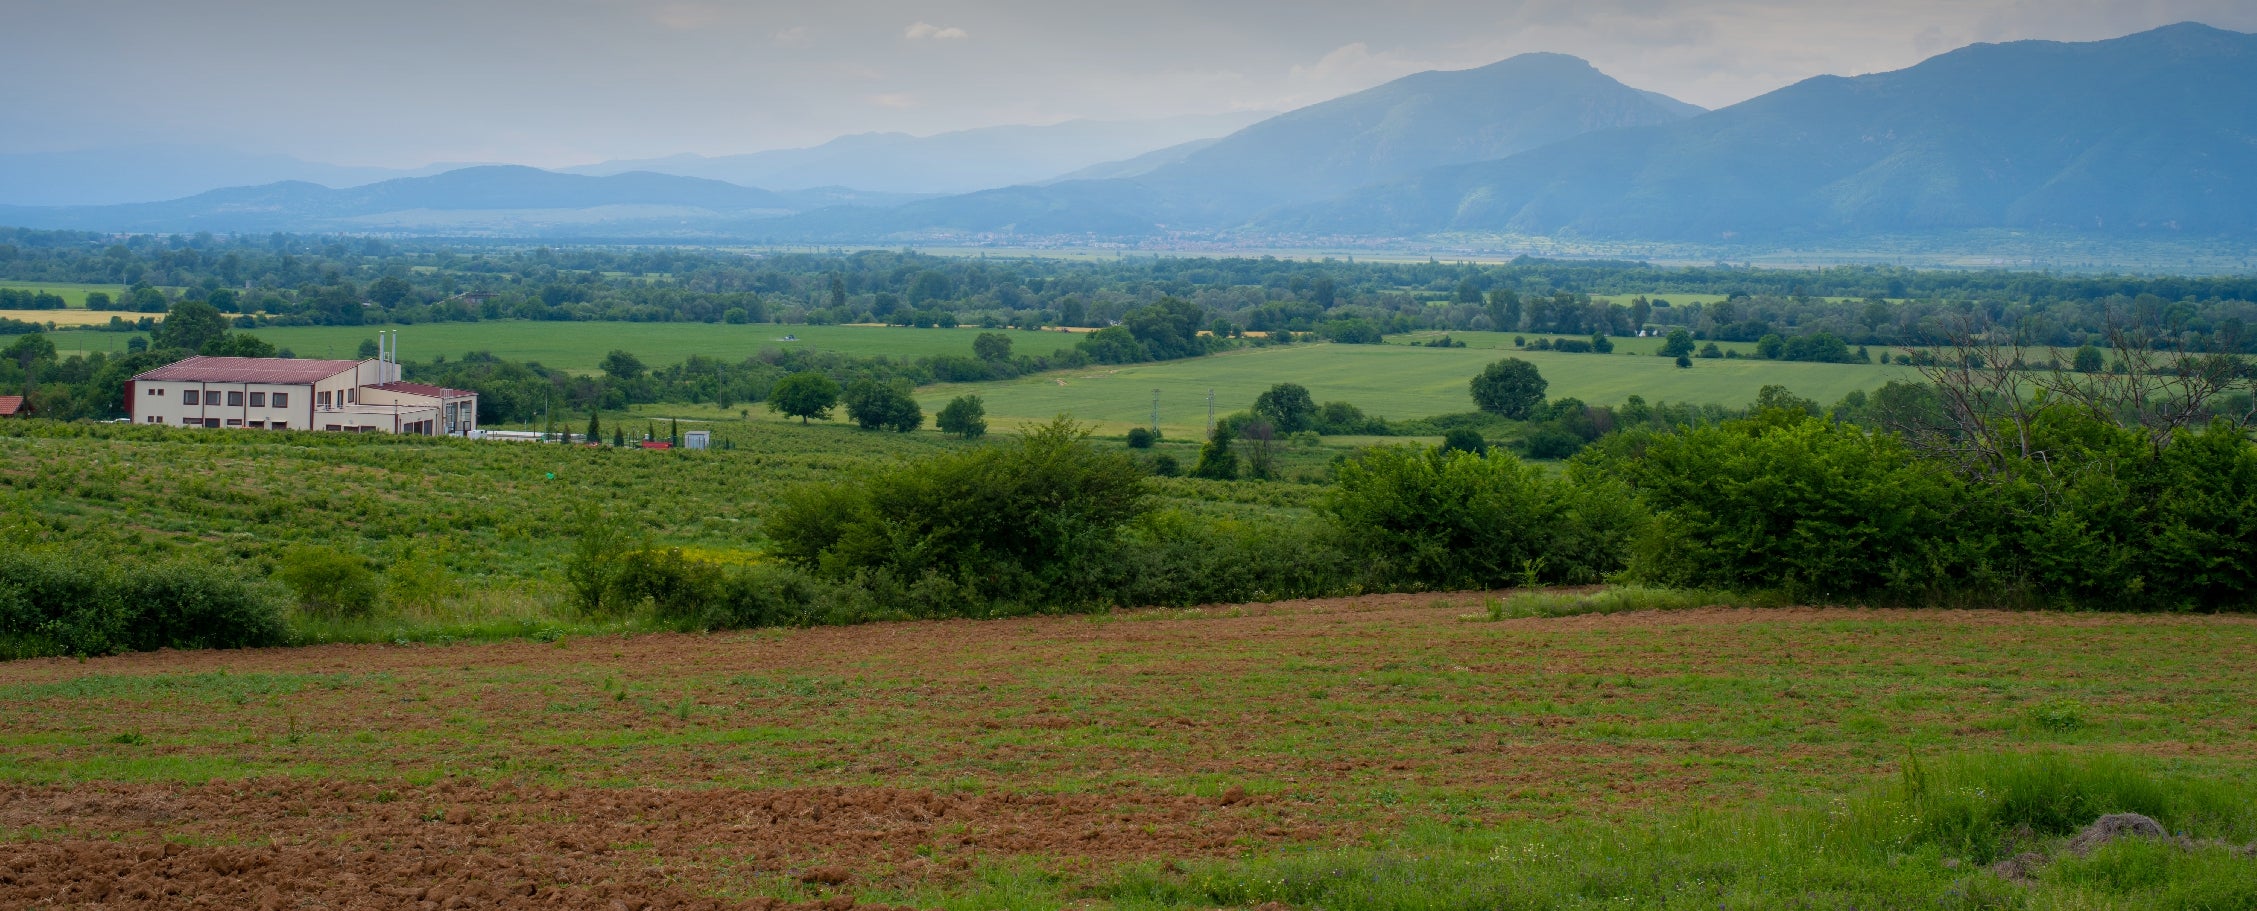 A large field with trees and mountains in the background.